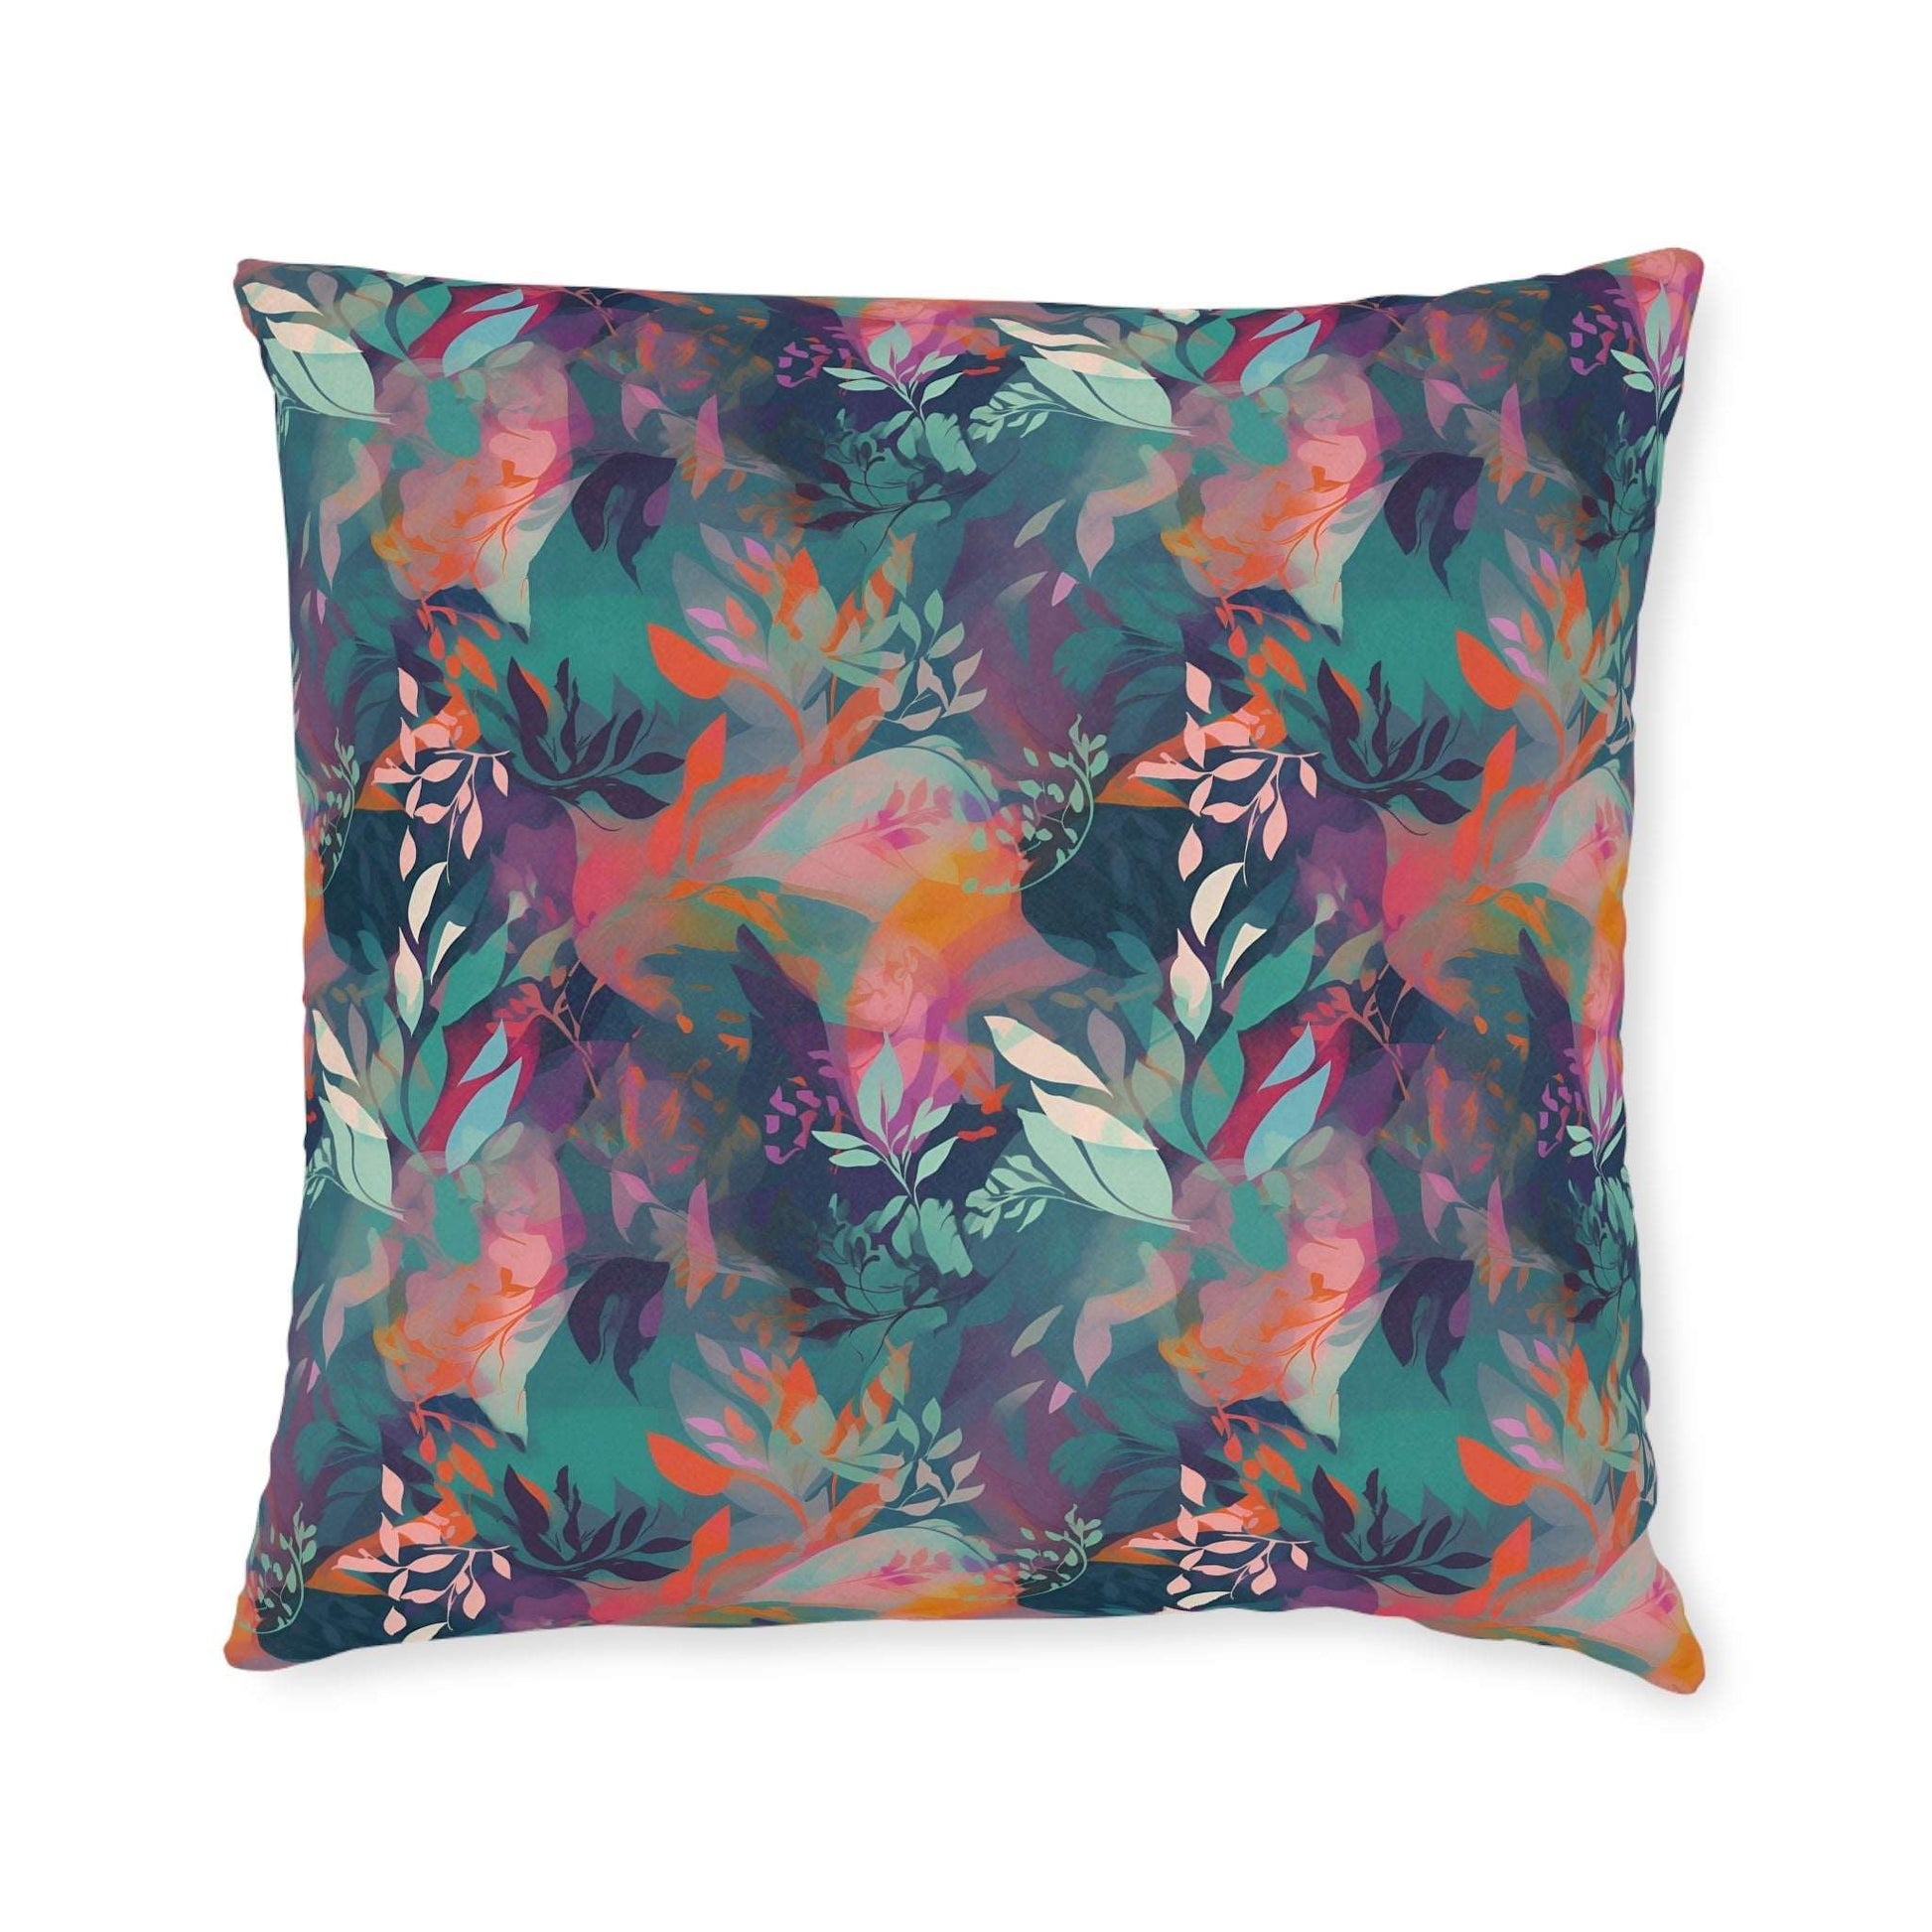 Botanical Bliss - Stylized Abstract Flower Design - Sofa and Chair Cushion - Pattern Symphony